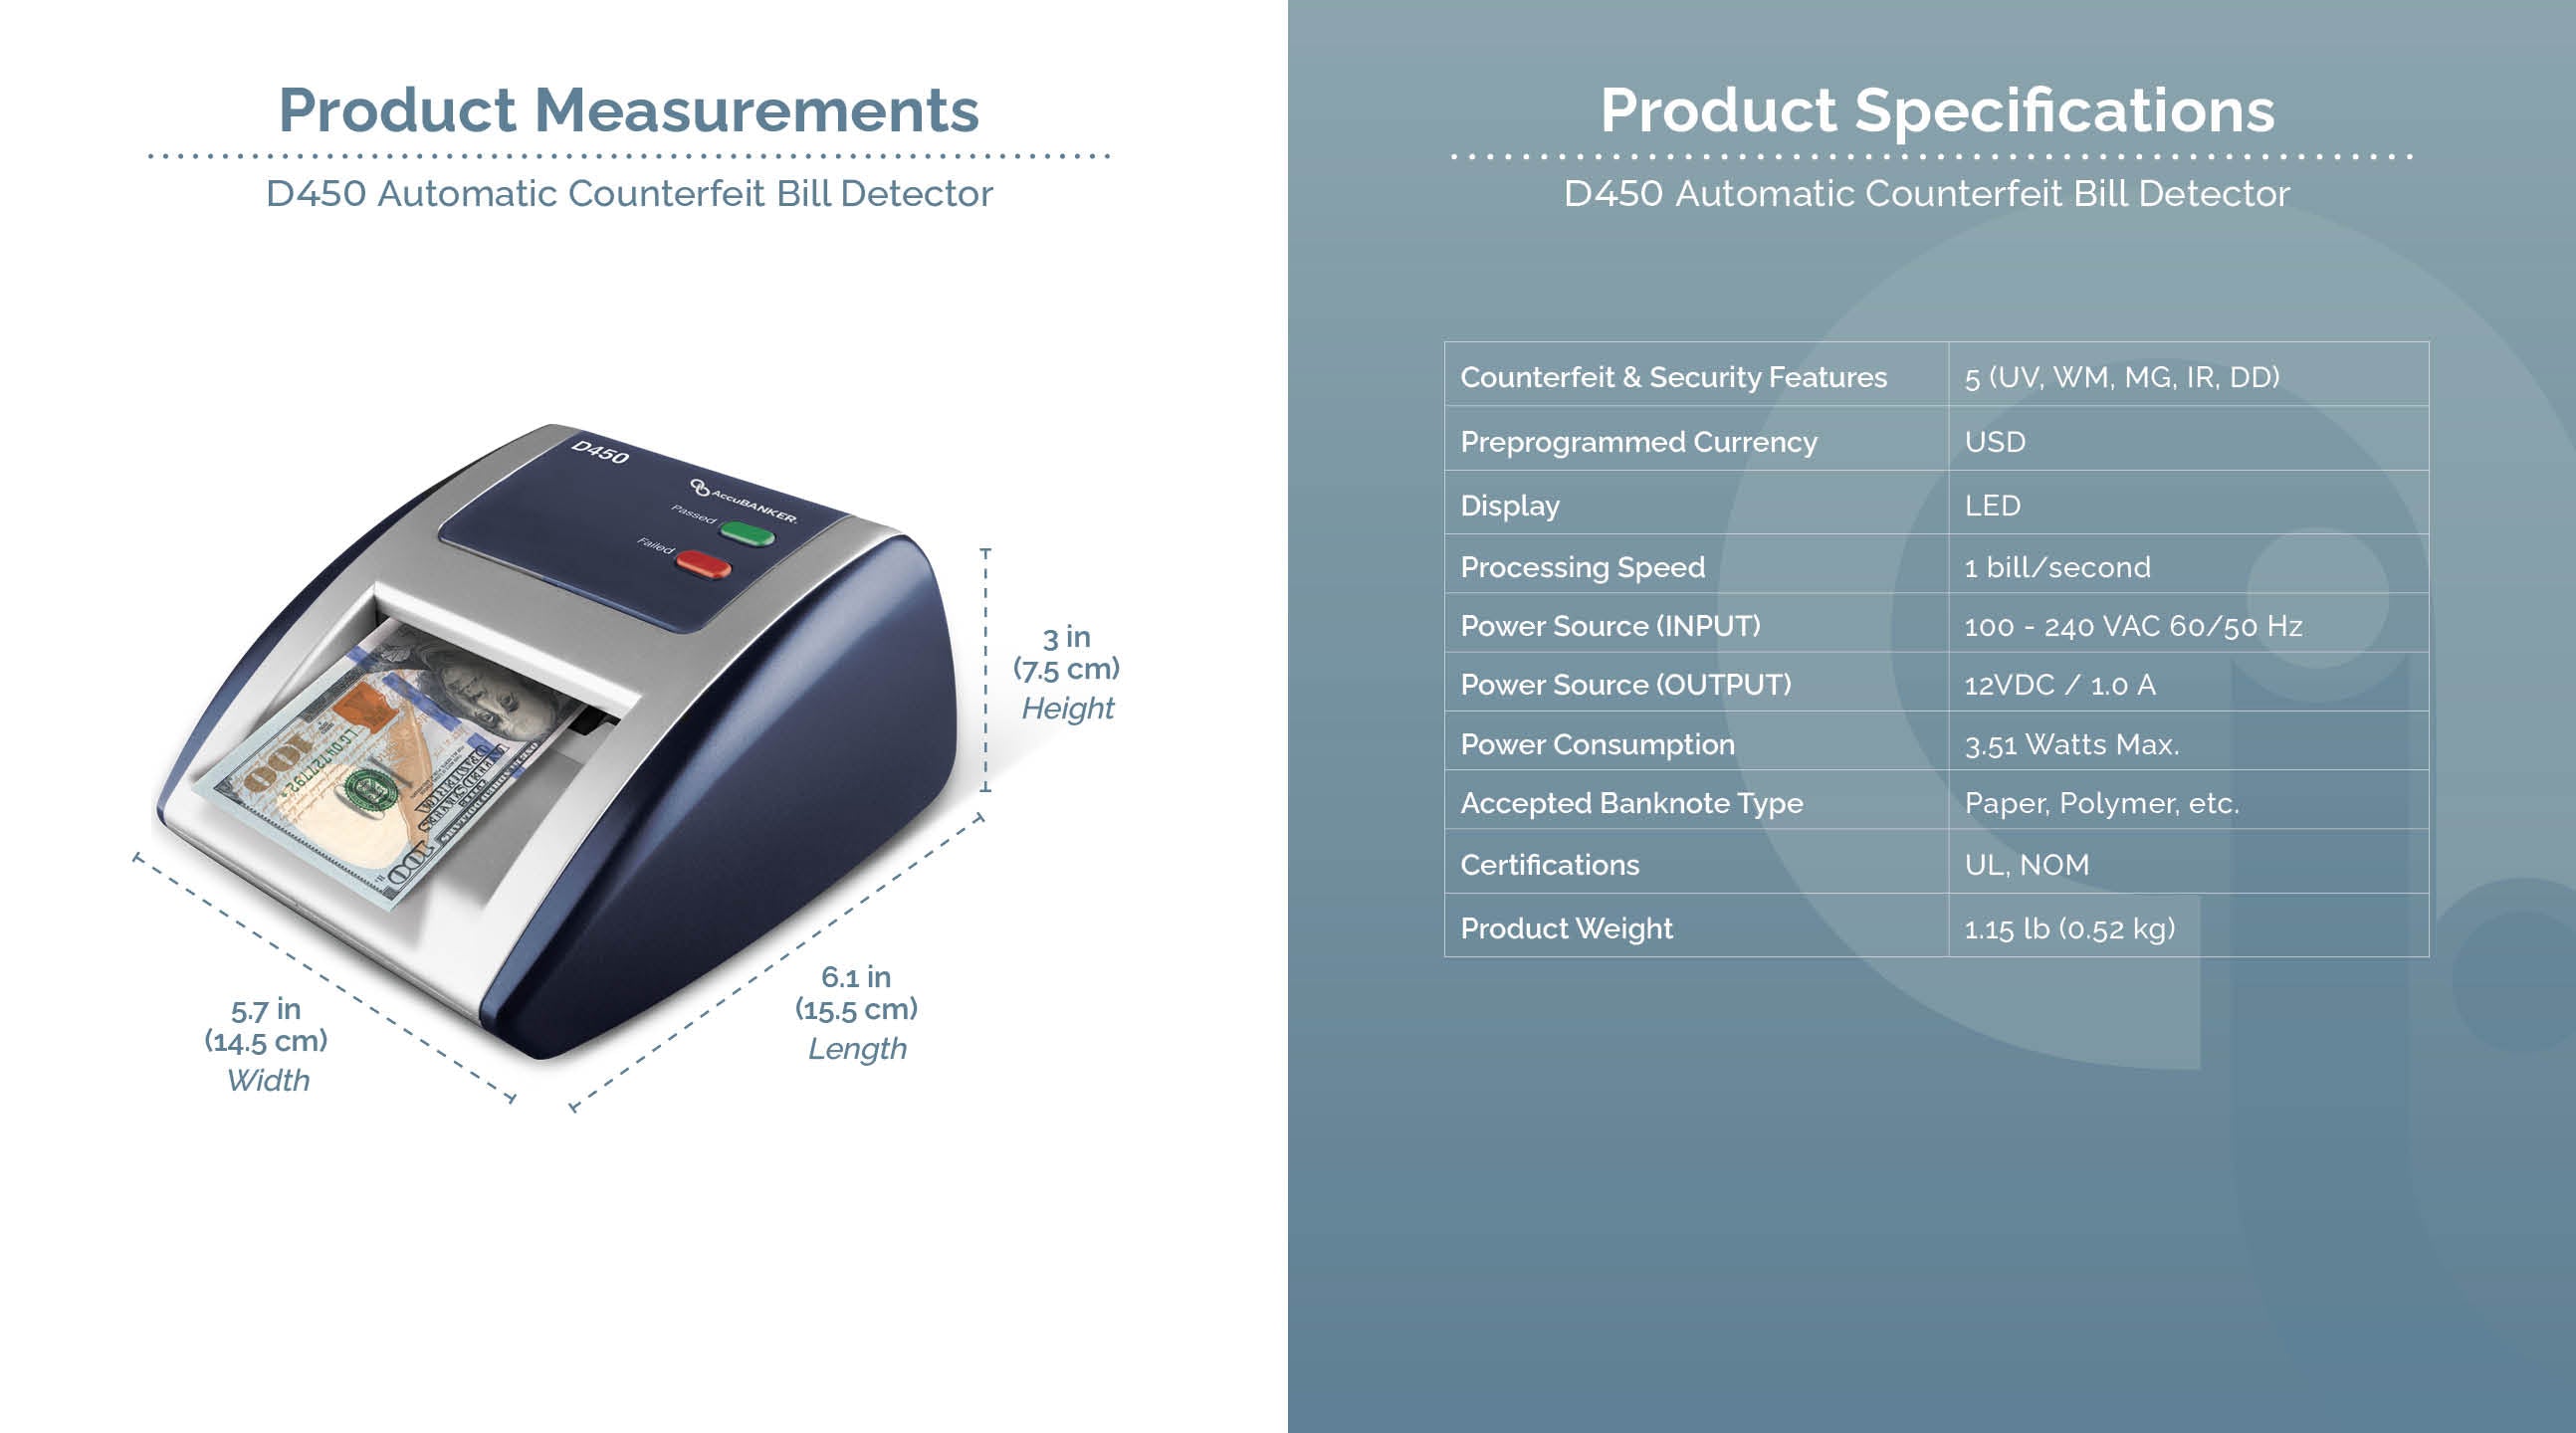 D450 Automatic Counterfeit Bill Detector Features & Specifications